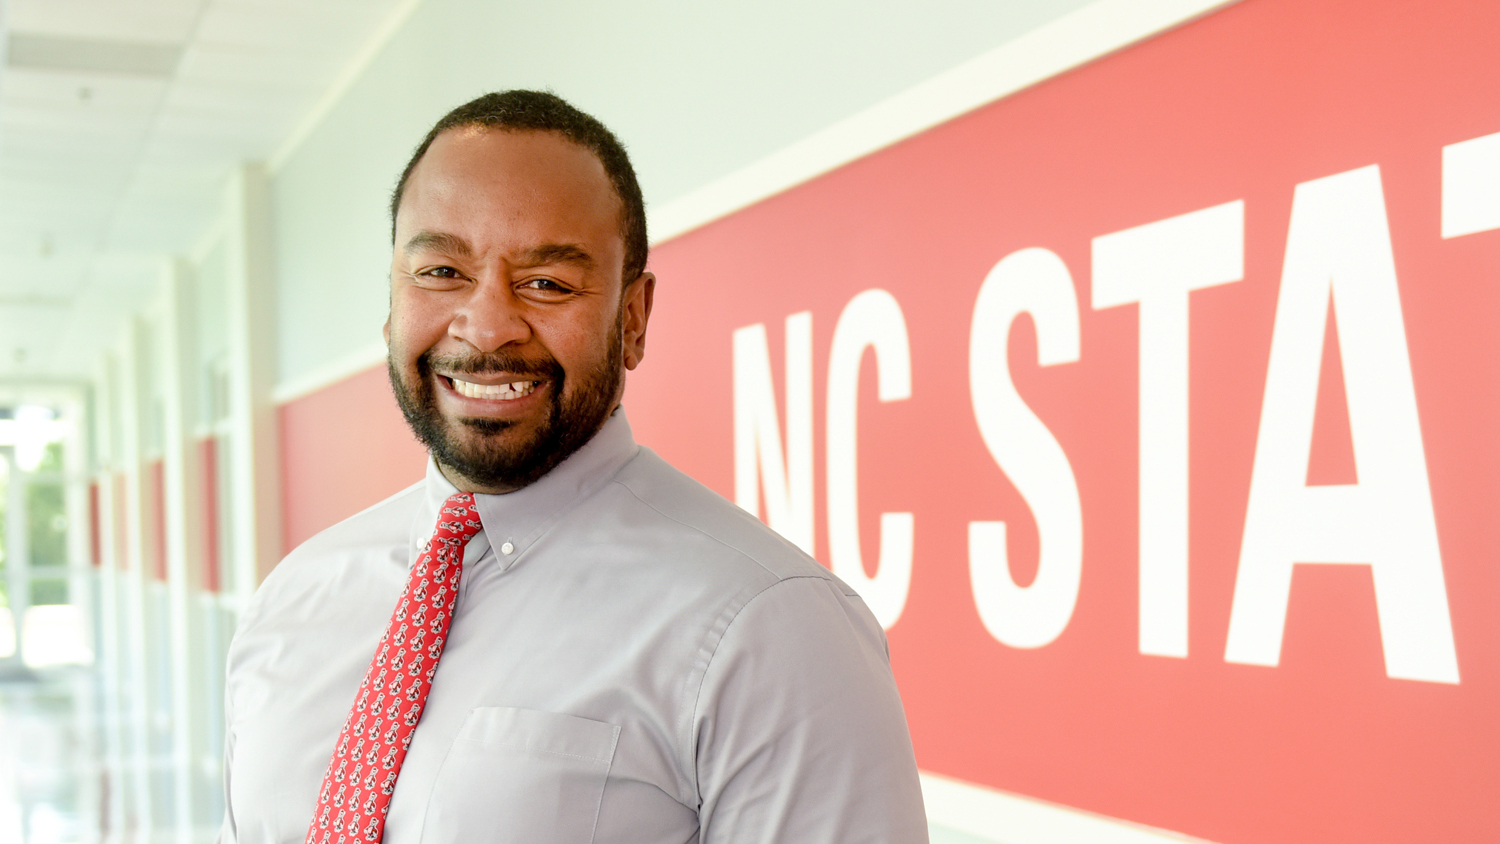 North Carolina Cooperative Extension Service Associate Director Travis Burke poses for a headshot in front of the NC State University logo.